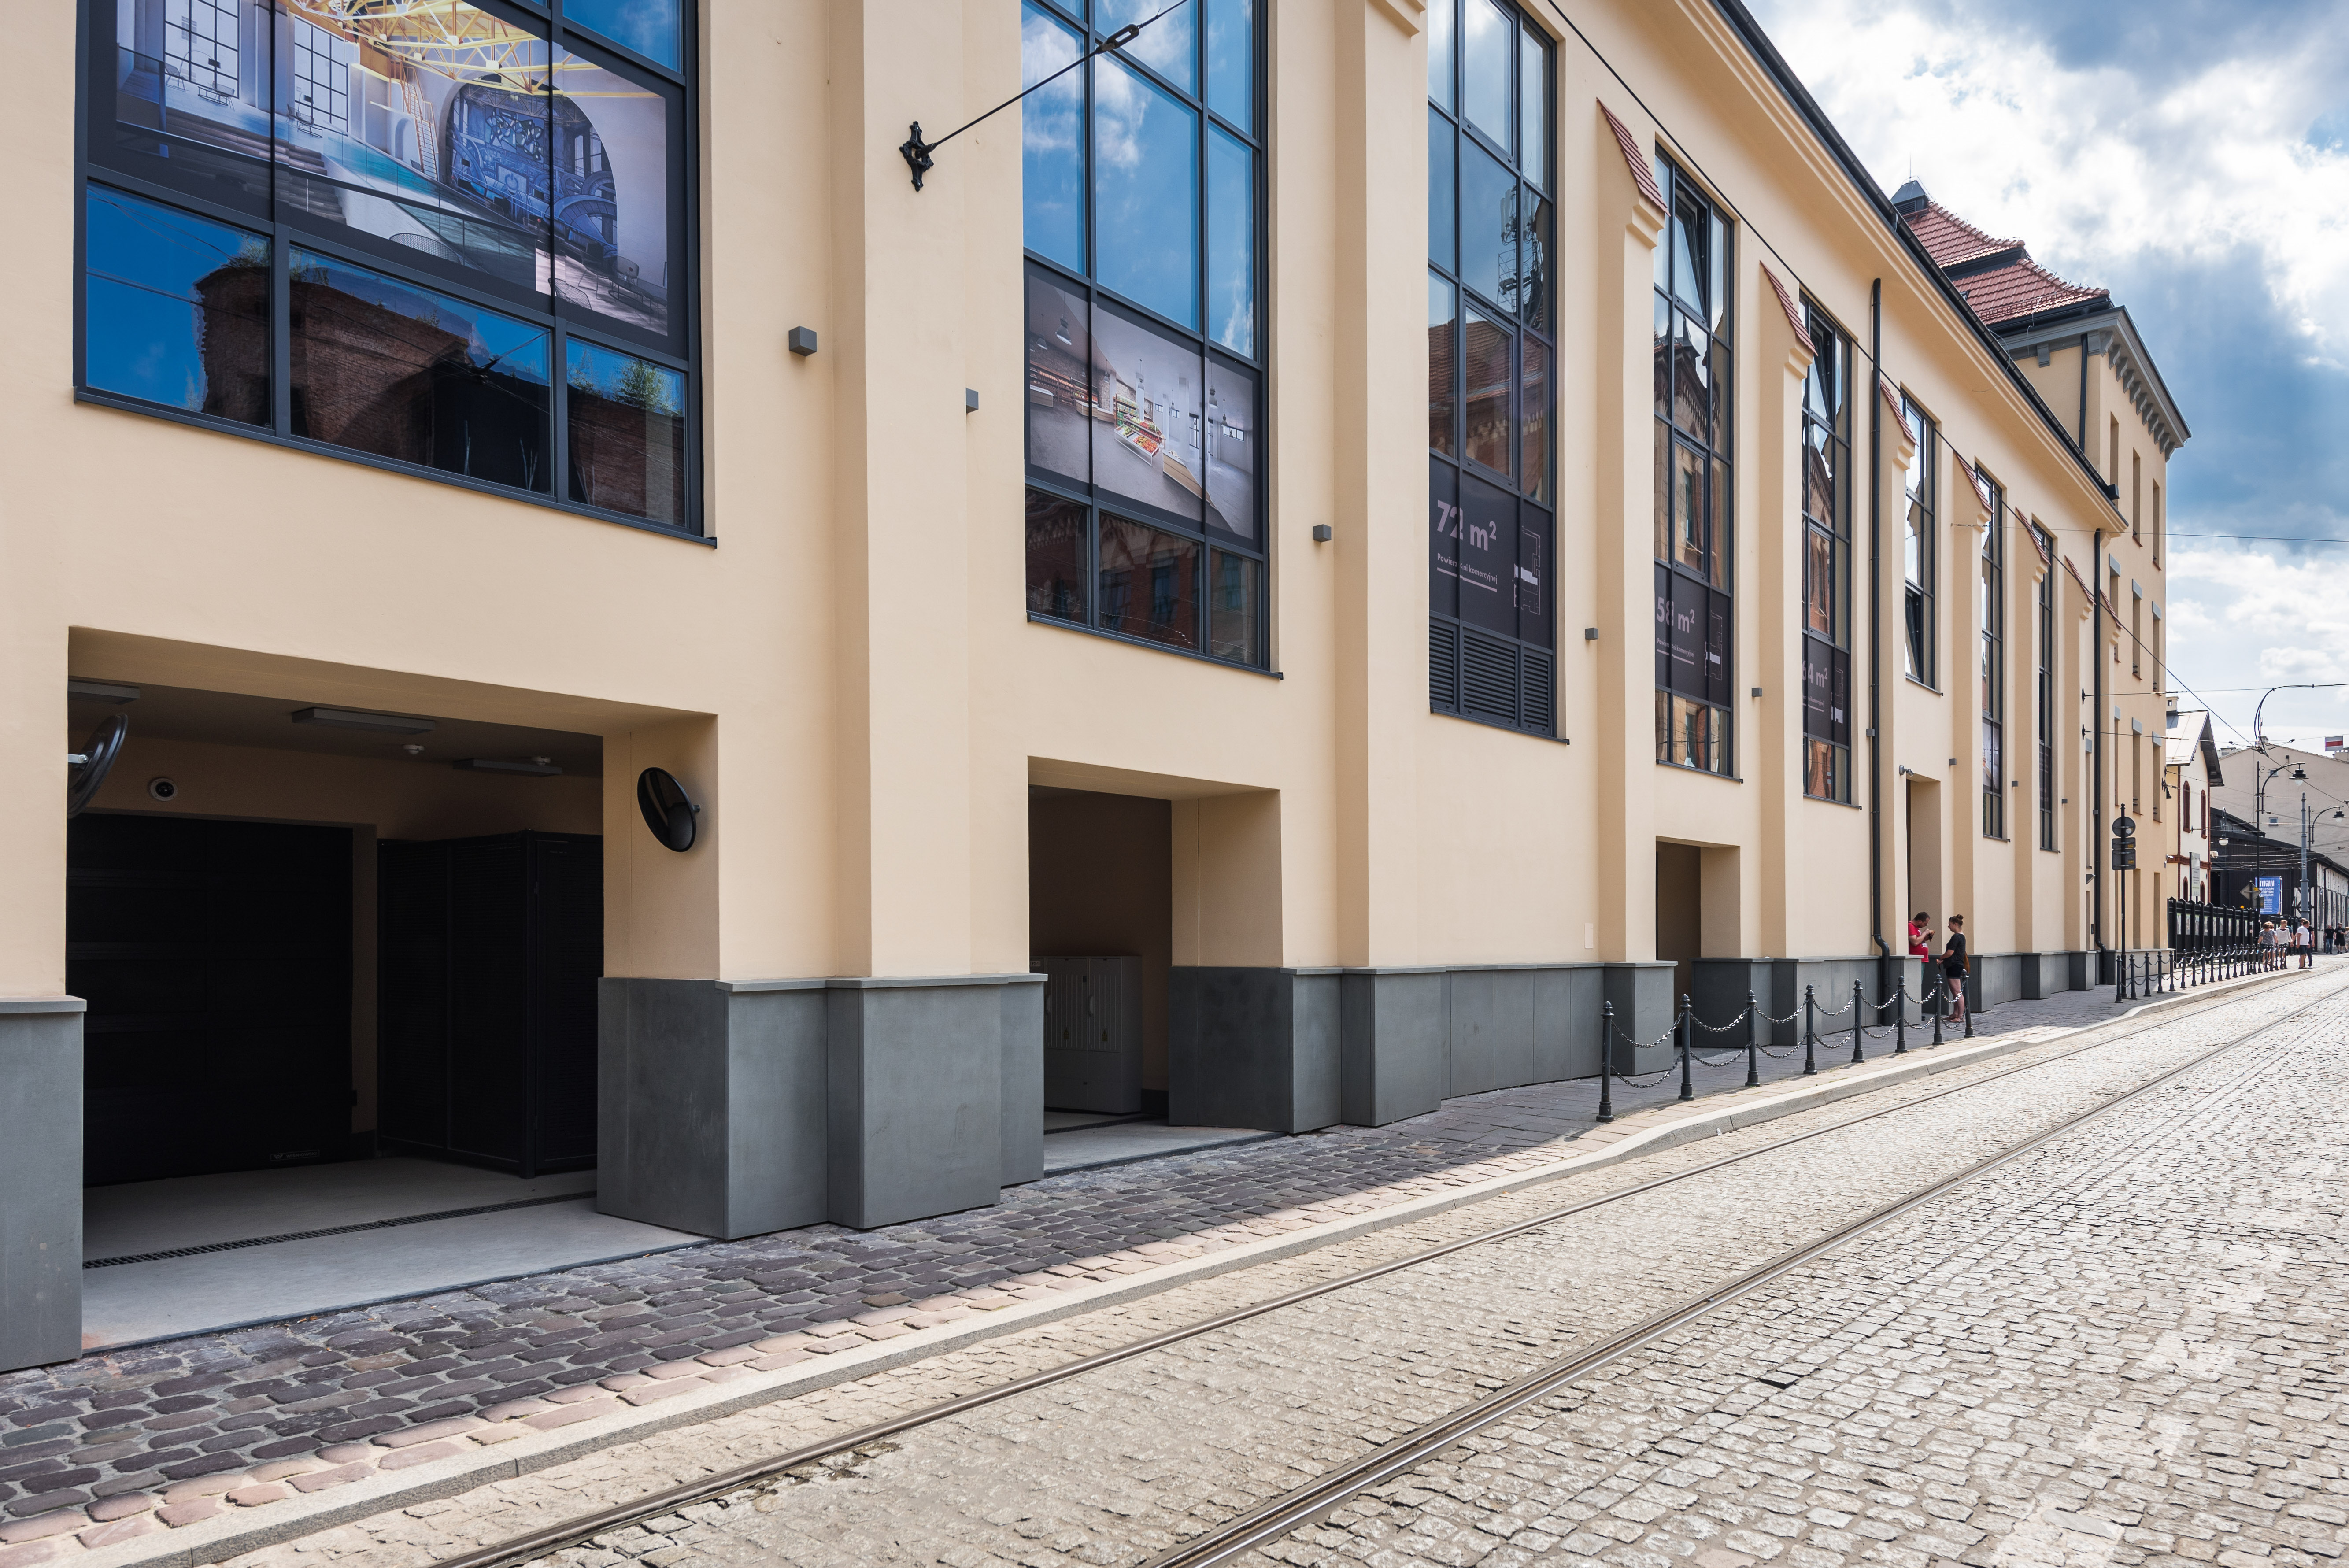 New investment in the heart of Jewish Quarter - Wawrzyńca 21